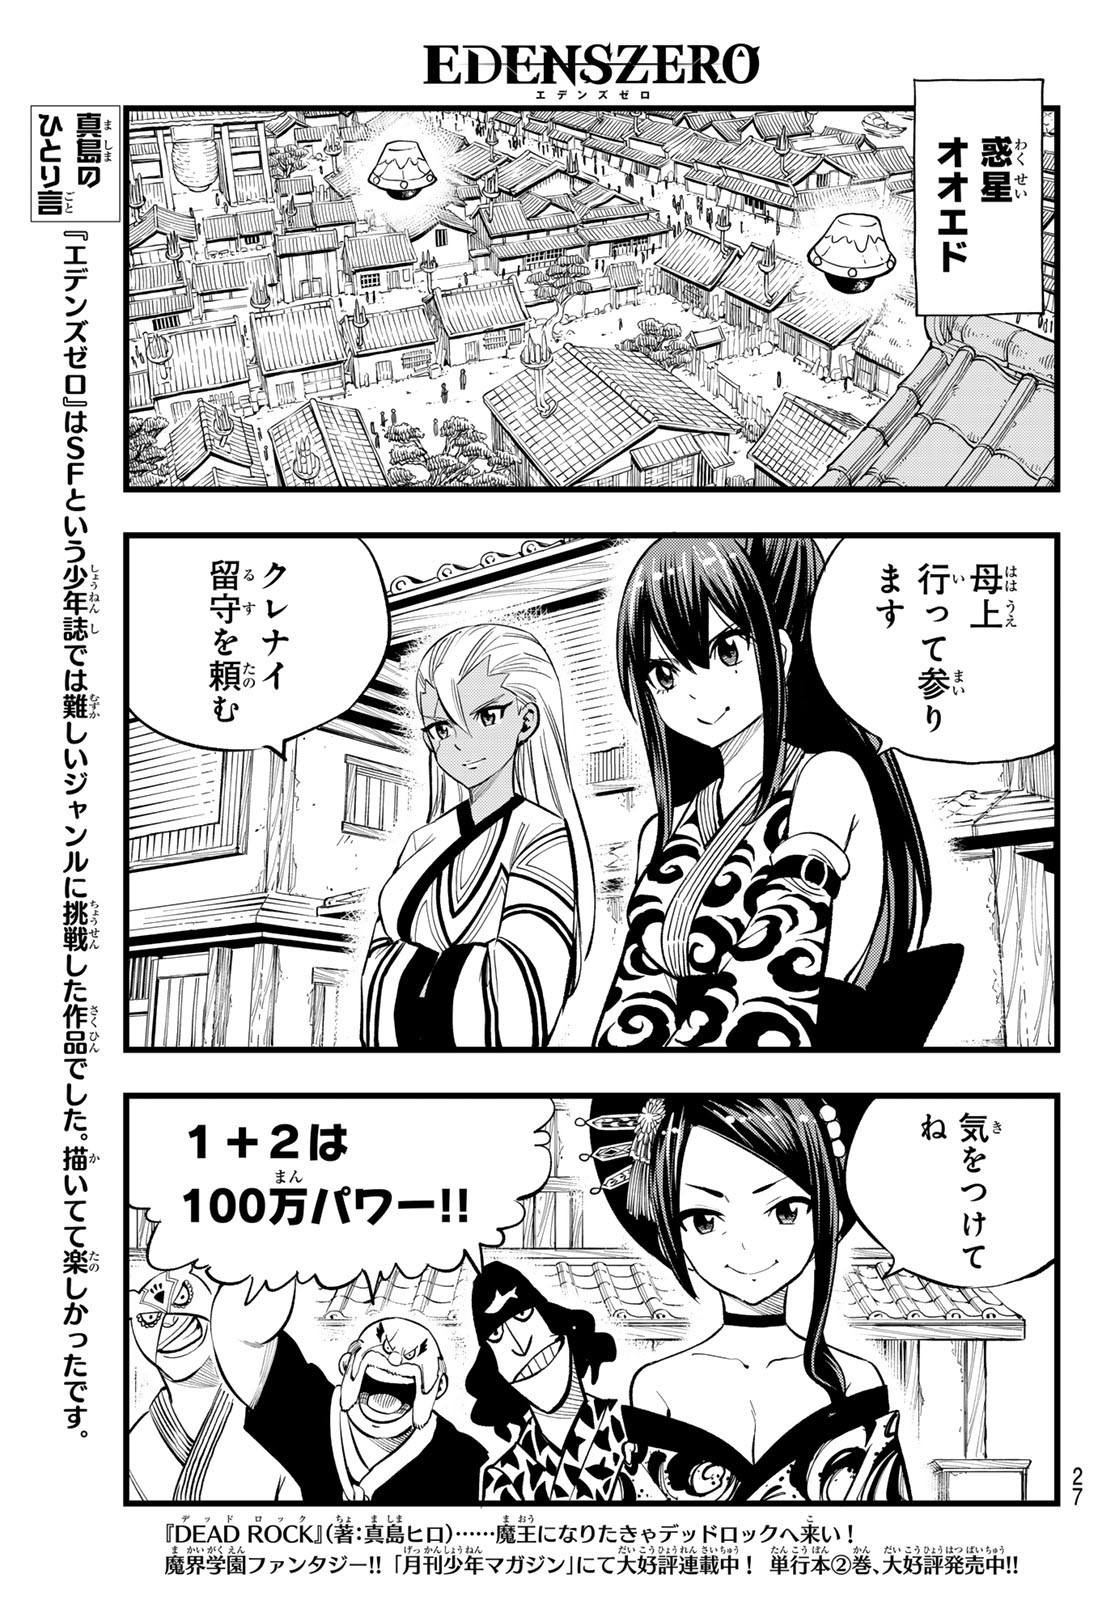 Weekly Shōnen Magazine - 週刊少年マガジン - Chapter 2024-30 - Page 24